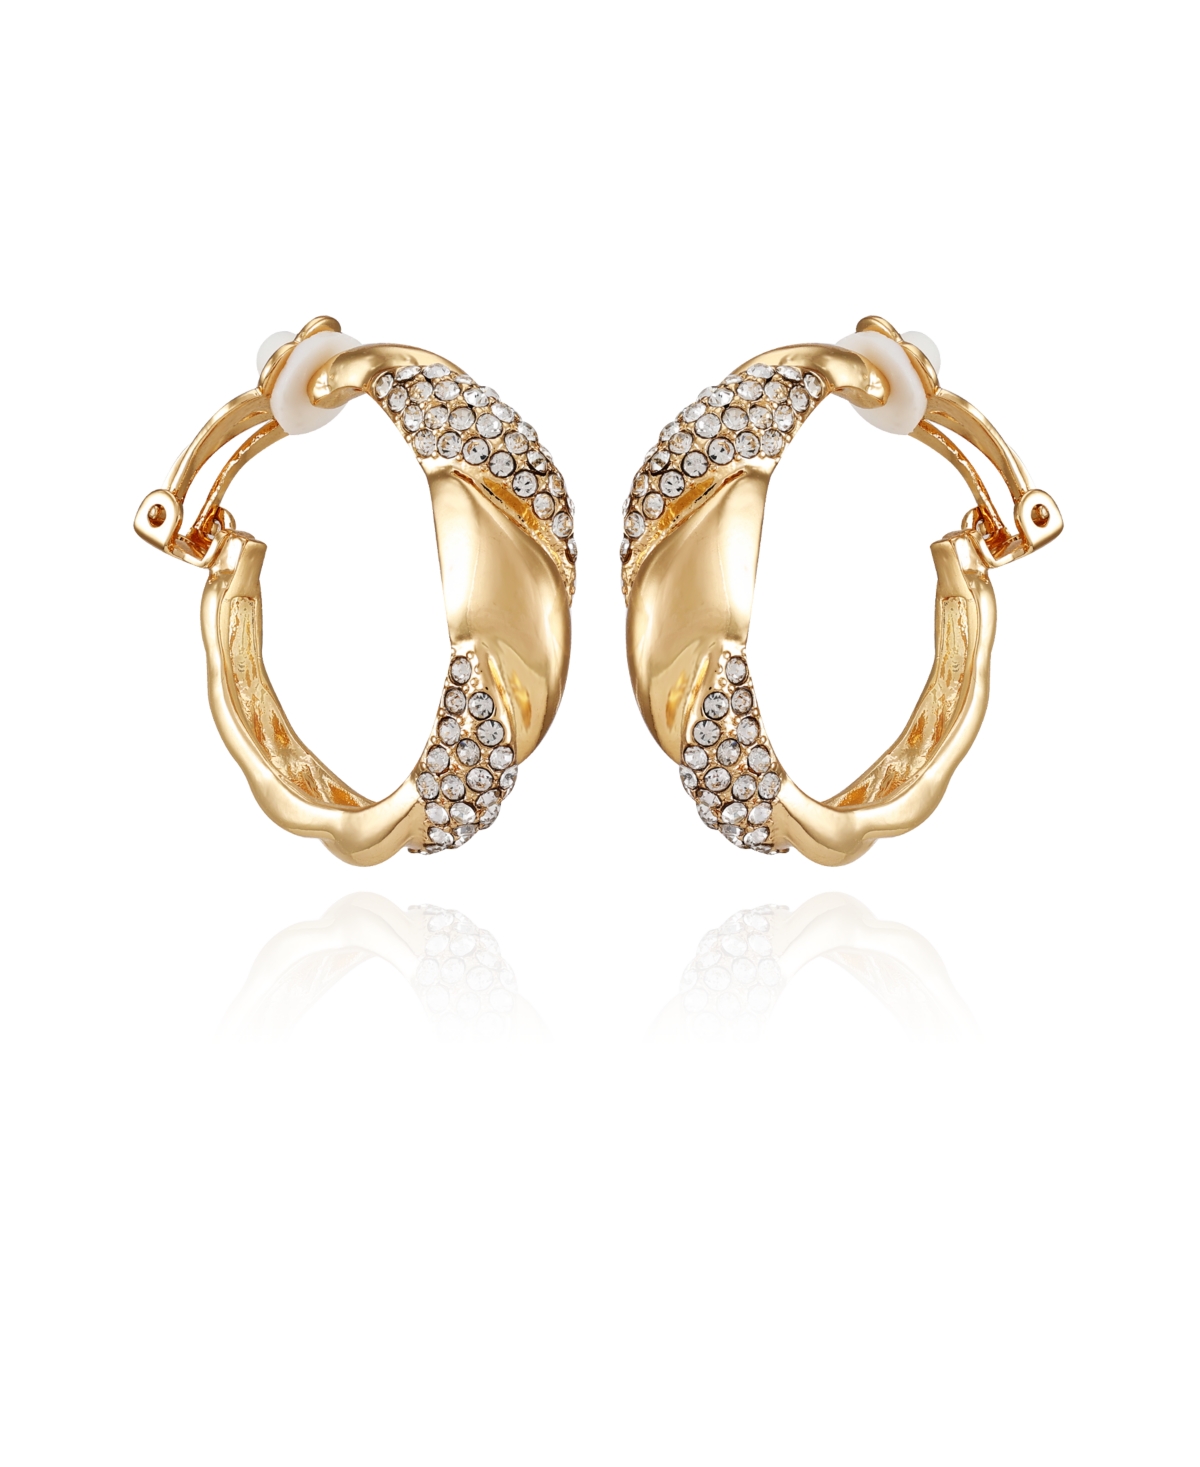 Gold-Tone Woven Glass Stone Clip On Hoop Earrings - Gold